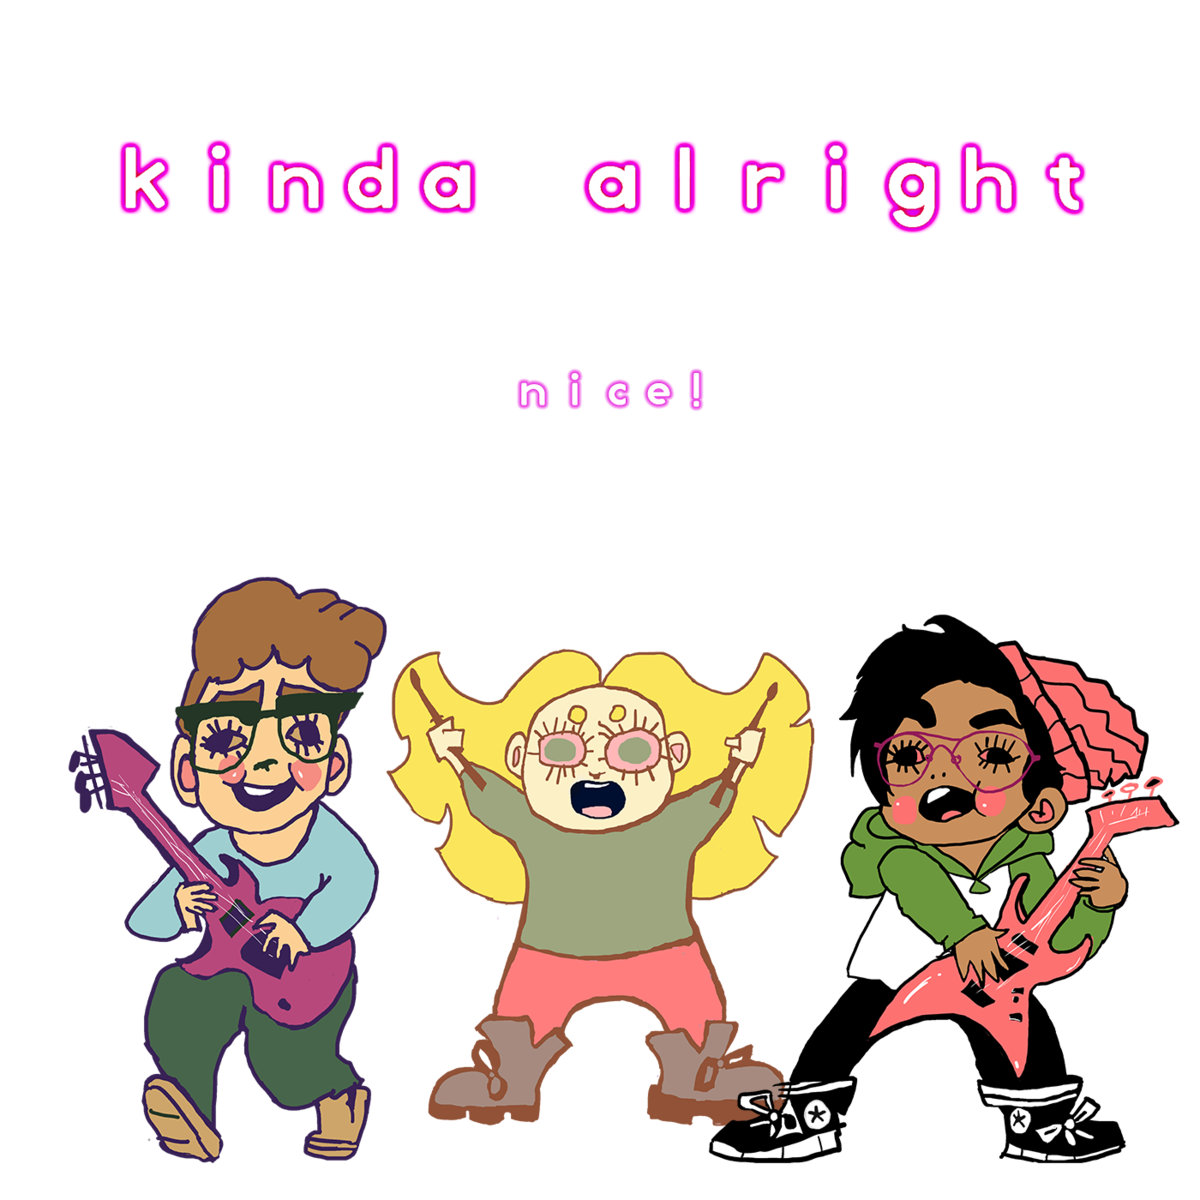 Review: “nice!” by kinda alright